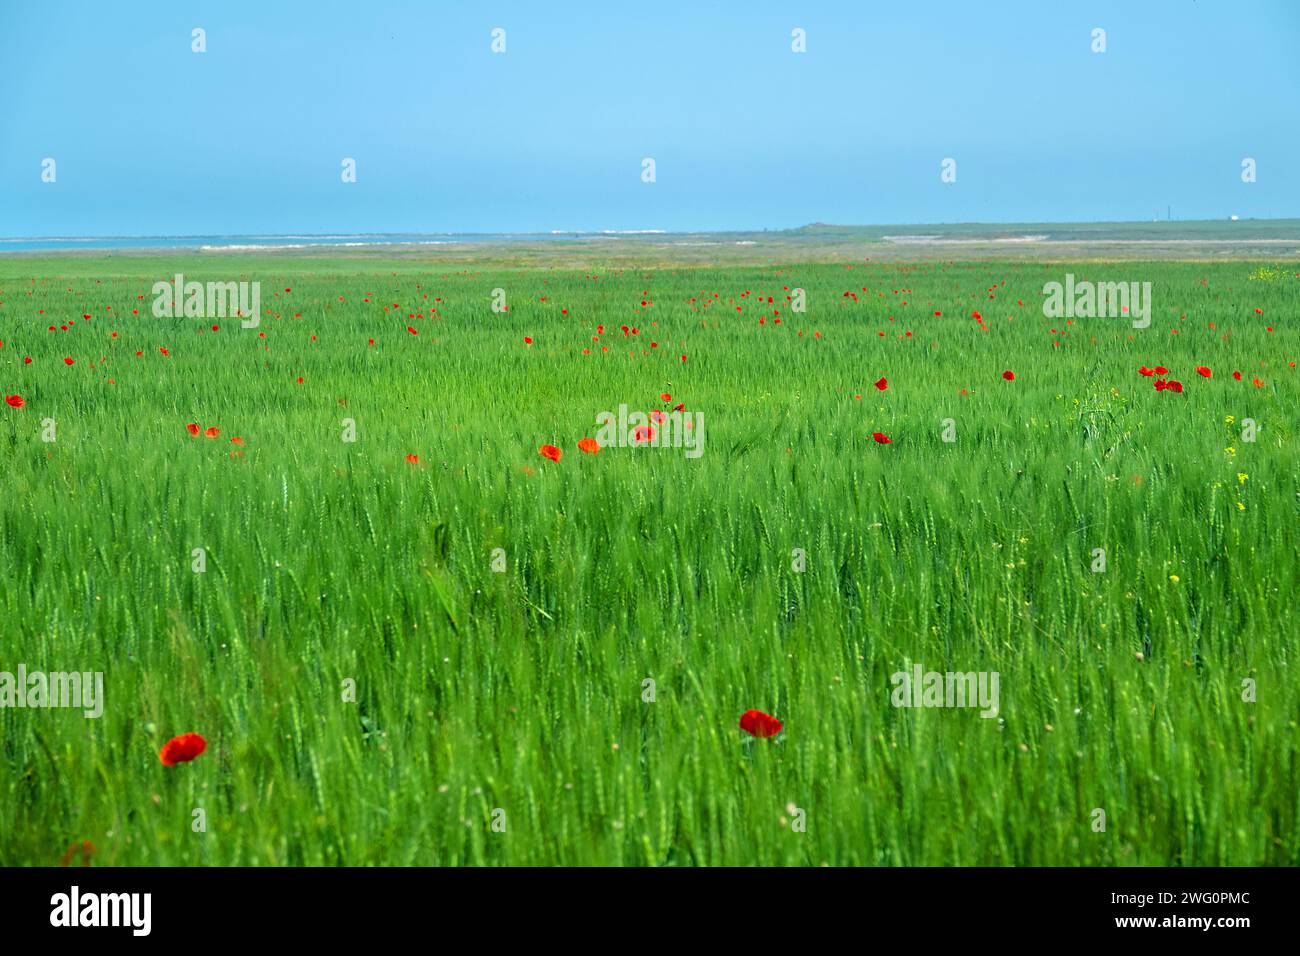 Flat steppe on the shore of Lake Sivash on the Kerch peninsula. A field of wheat with purple spots of red poppies. Corn poppy (Papaver rhoeas) as a we Stock Photo